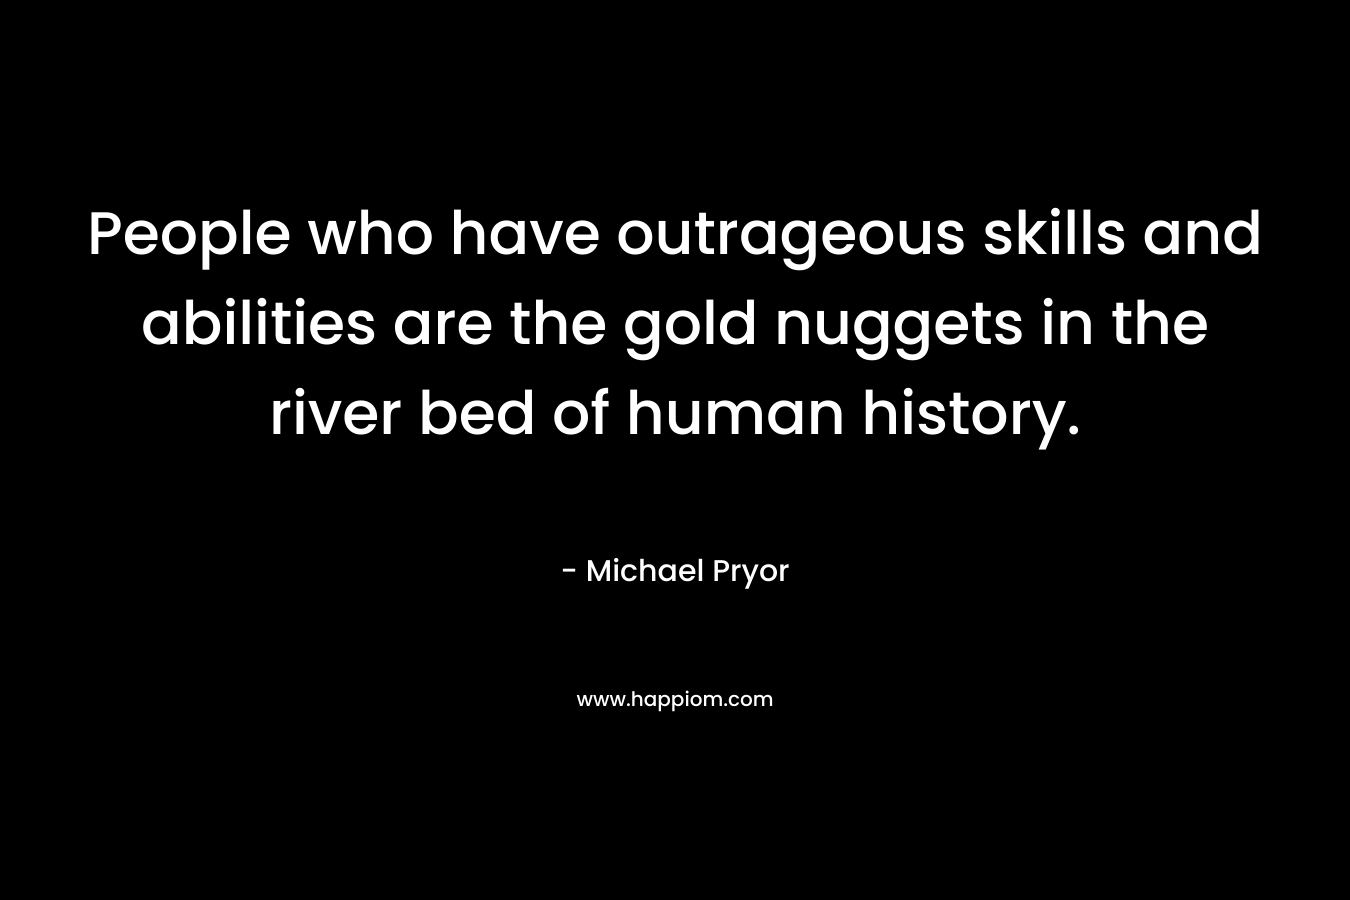 People who have outrageous skills and abilities are the gold nuggets in the river bed of human history.